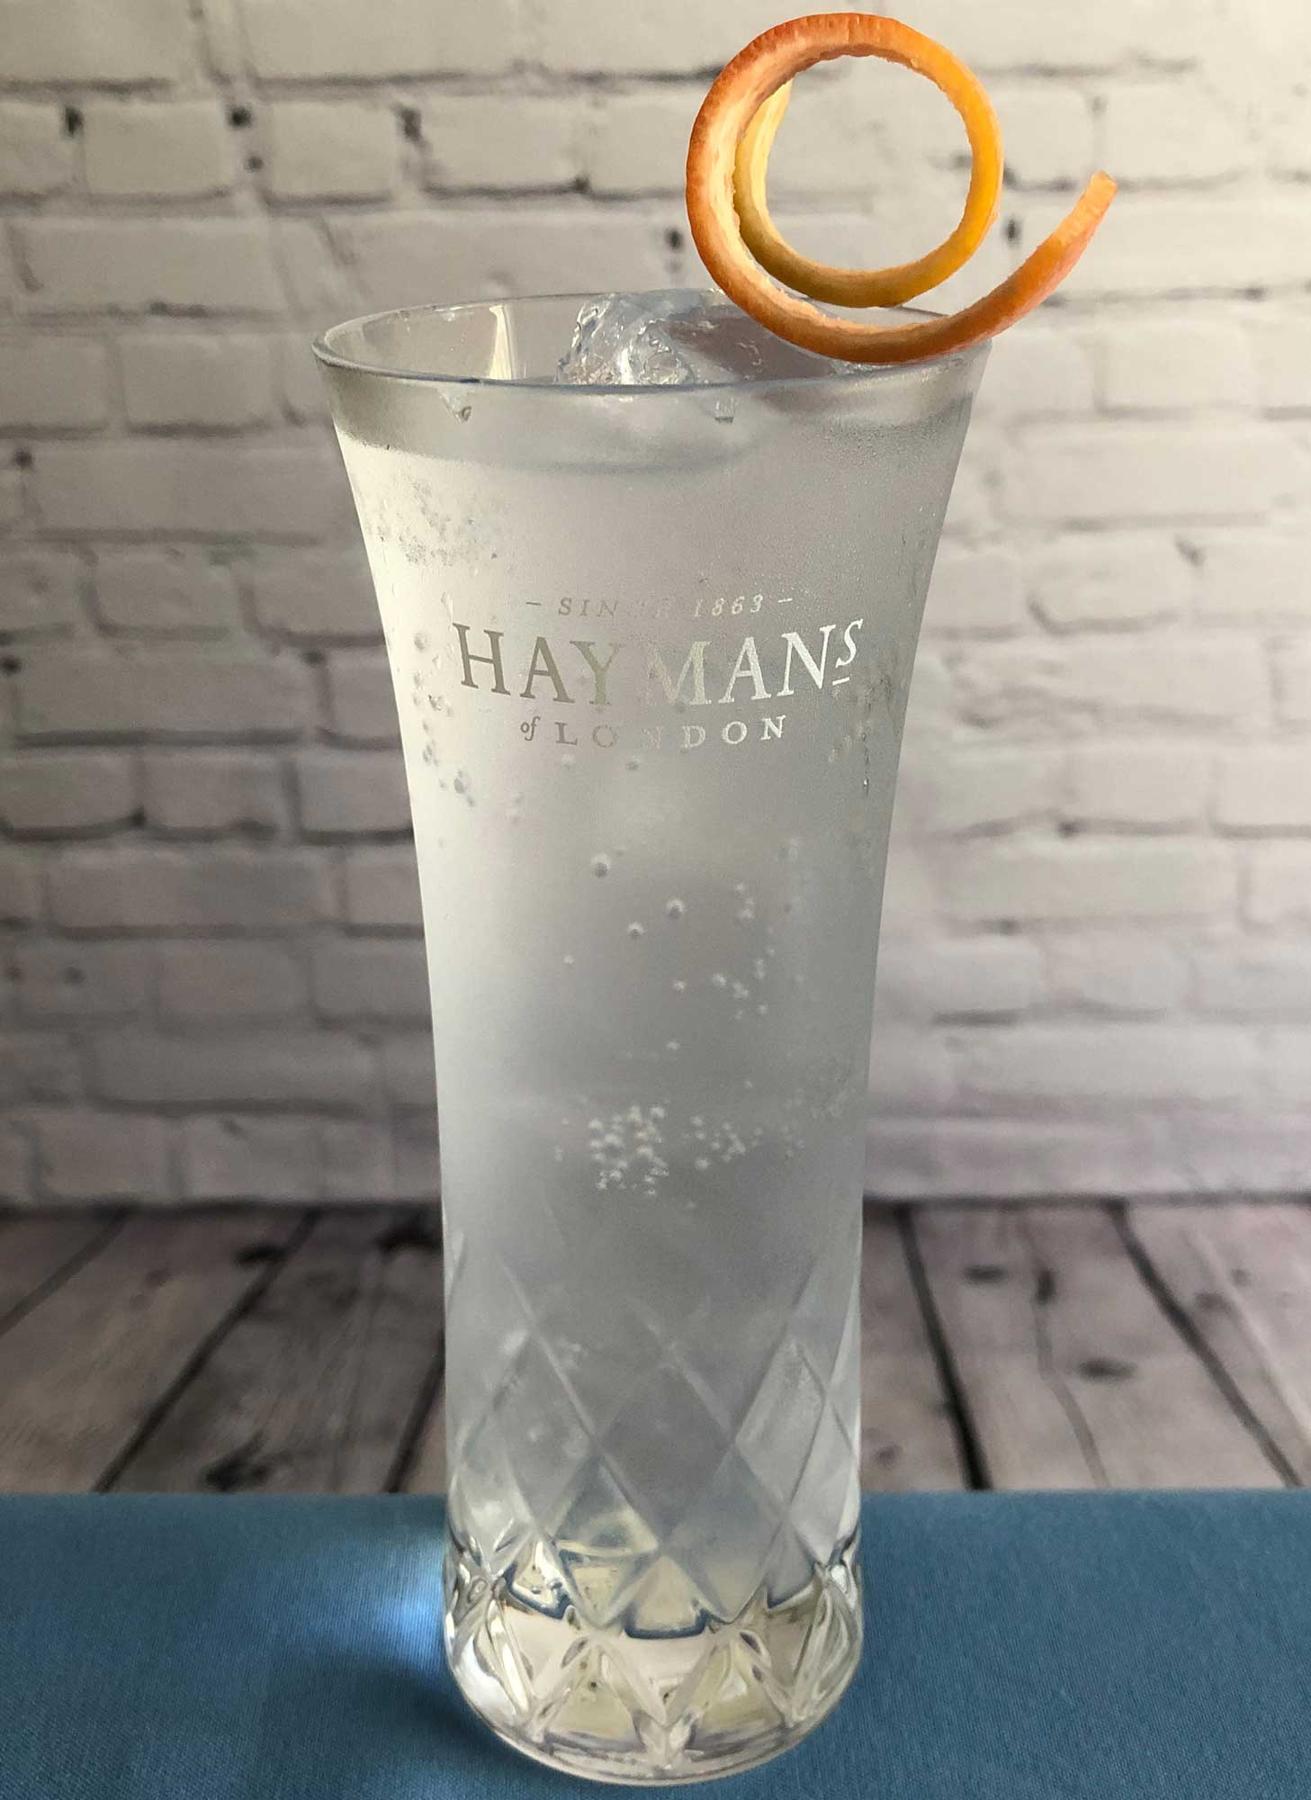 An example of the Royal Gin & Tonic, the mixed drink (drink) featuring Fever Tree Indian Tonic Water, Hayman’s Royal Dock Navy Strength Gin, lime wedge, and grapefruit twist; photo by Lee Edwards